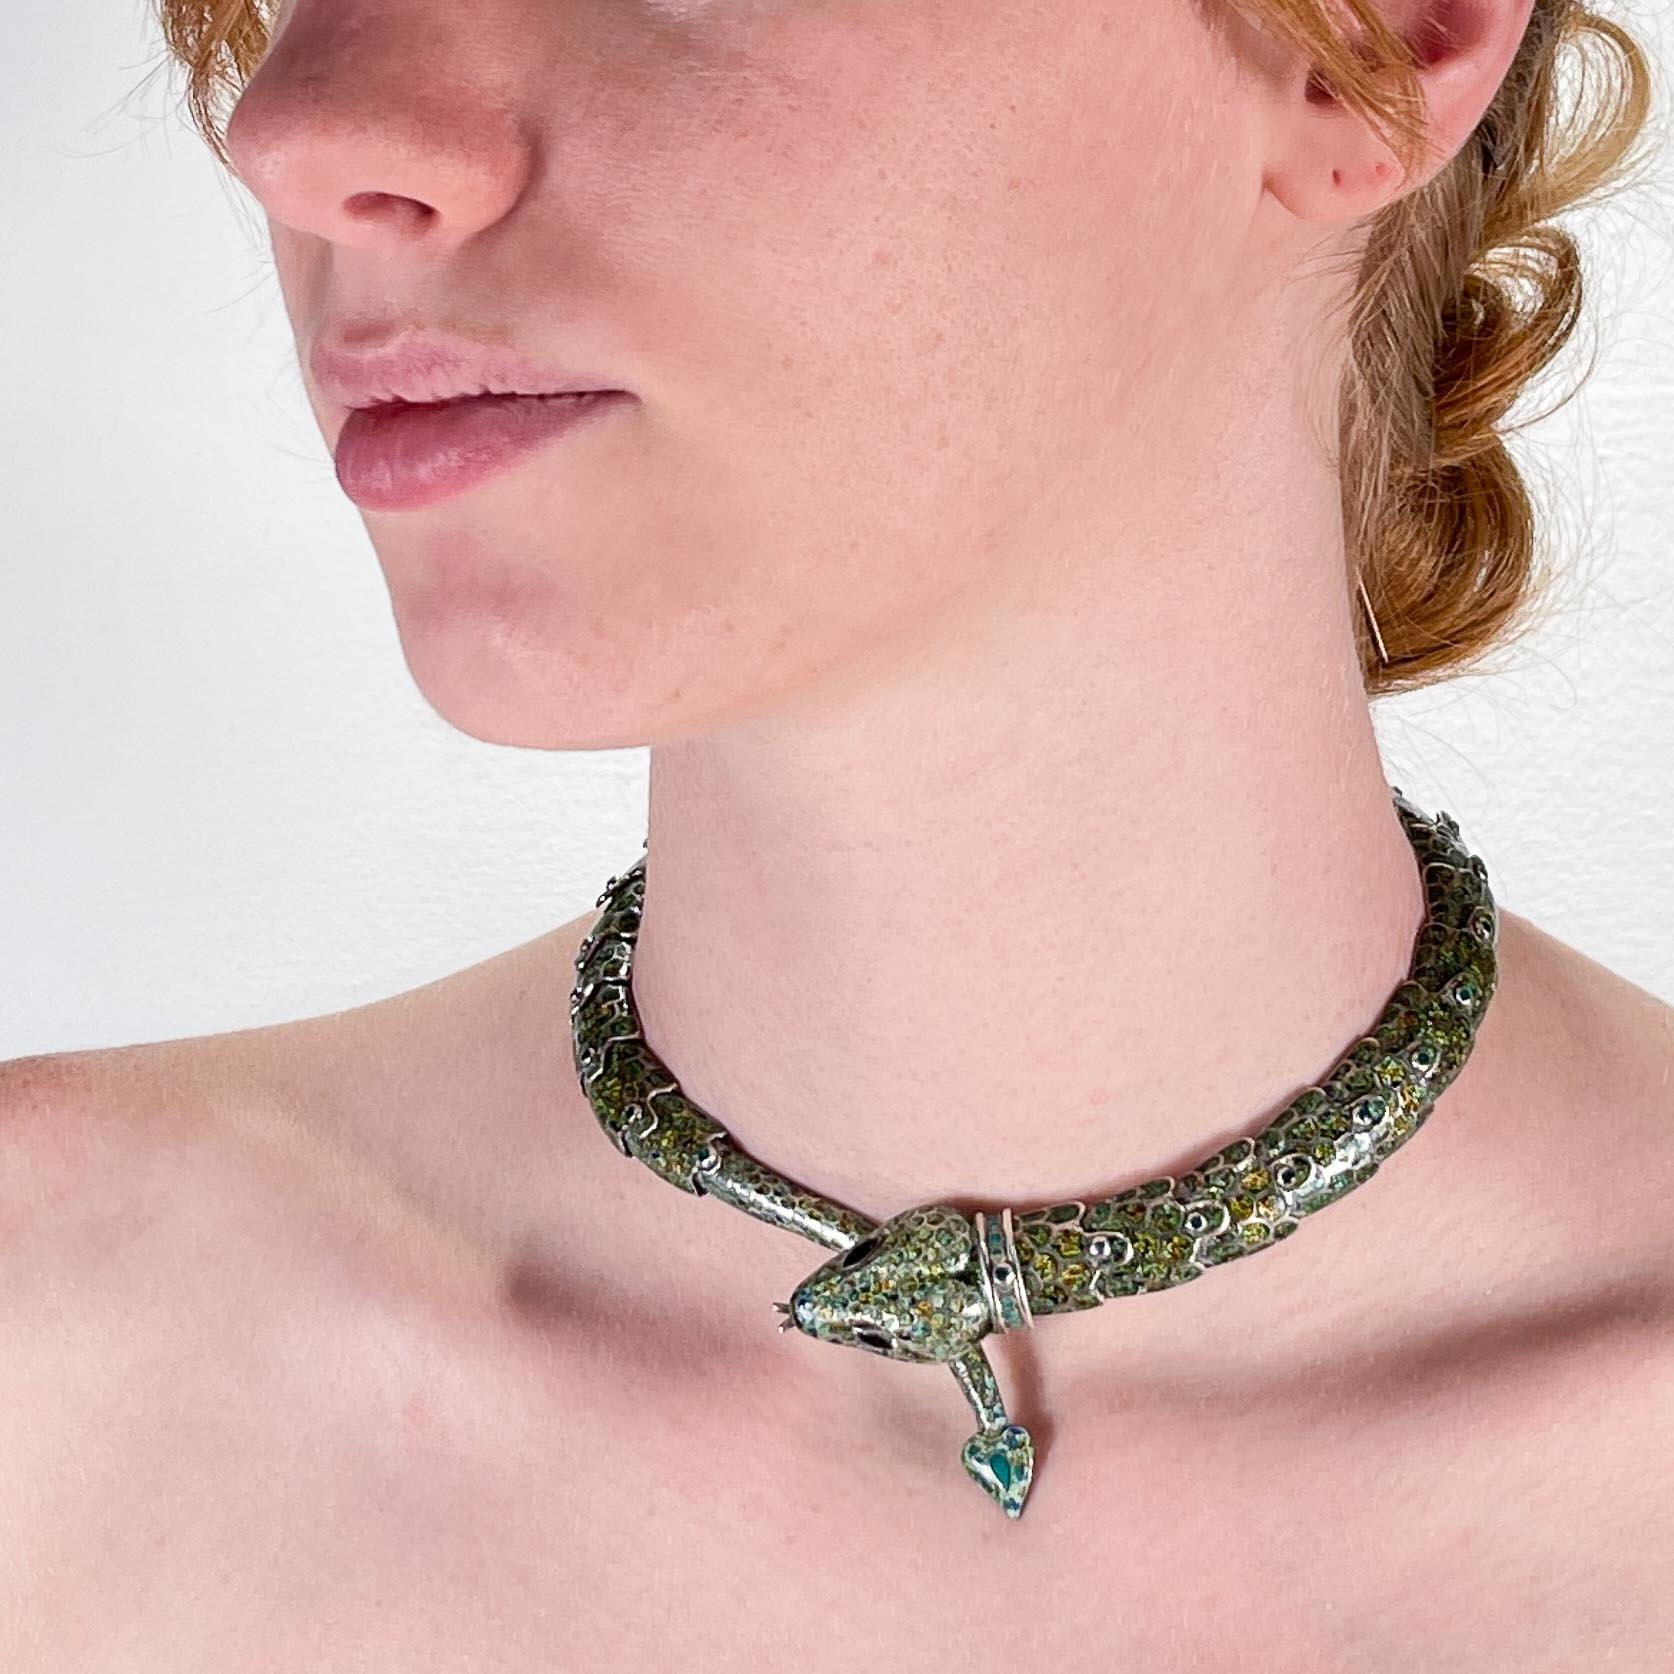 A very fine Mexican sterling silver & enamel necklace.

In the form of a green-scaled snake or serpent. 

By Margot de Taxco (Margo Vaughn Voorhies Carr).

Pattern no. 5554

These colliers are one of the most coveted forms by Margot.

Simply a